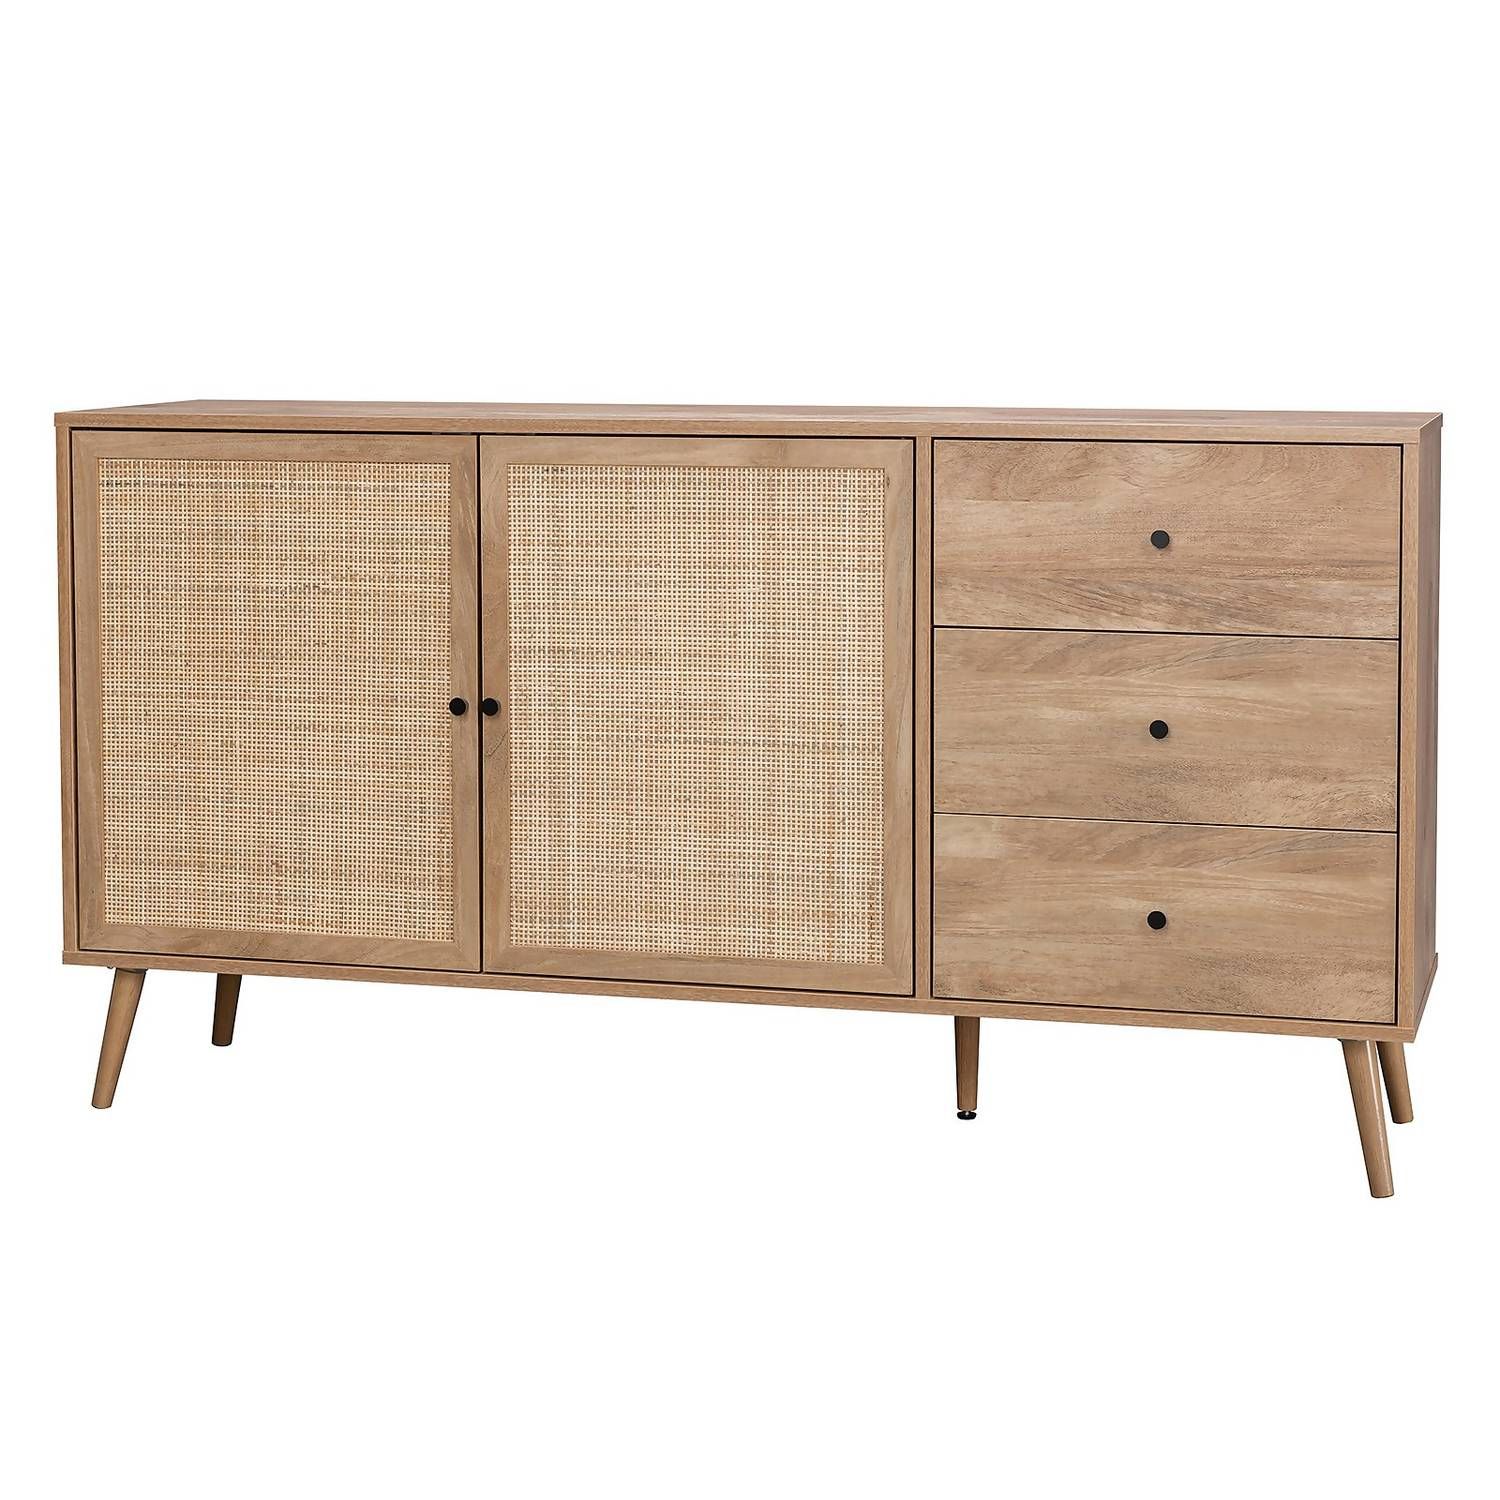 Kubu Rattan Large Sideboard | Homebase With Regard To Most Recent Assembled Rattan Sideboards (Photo 5 of 15)